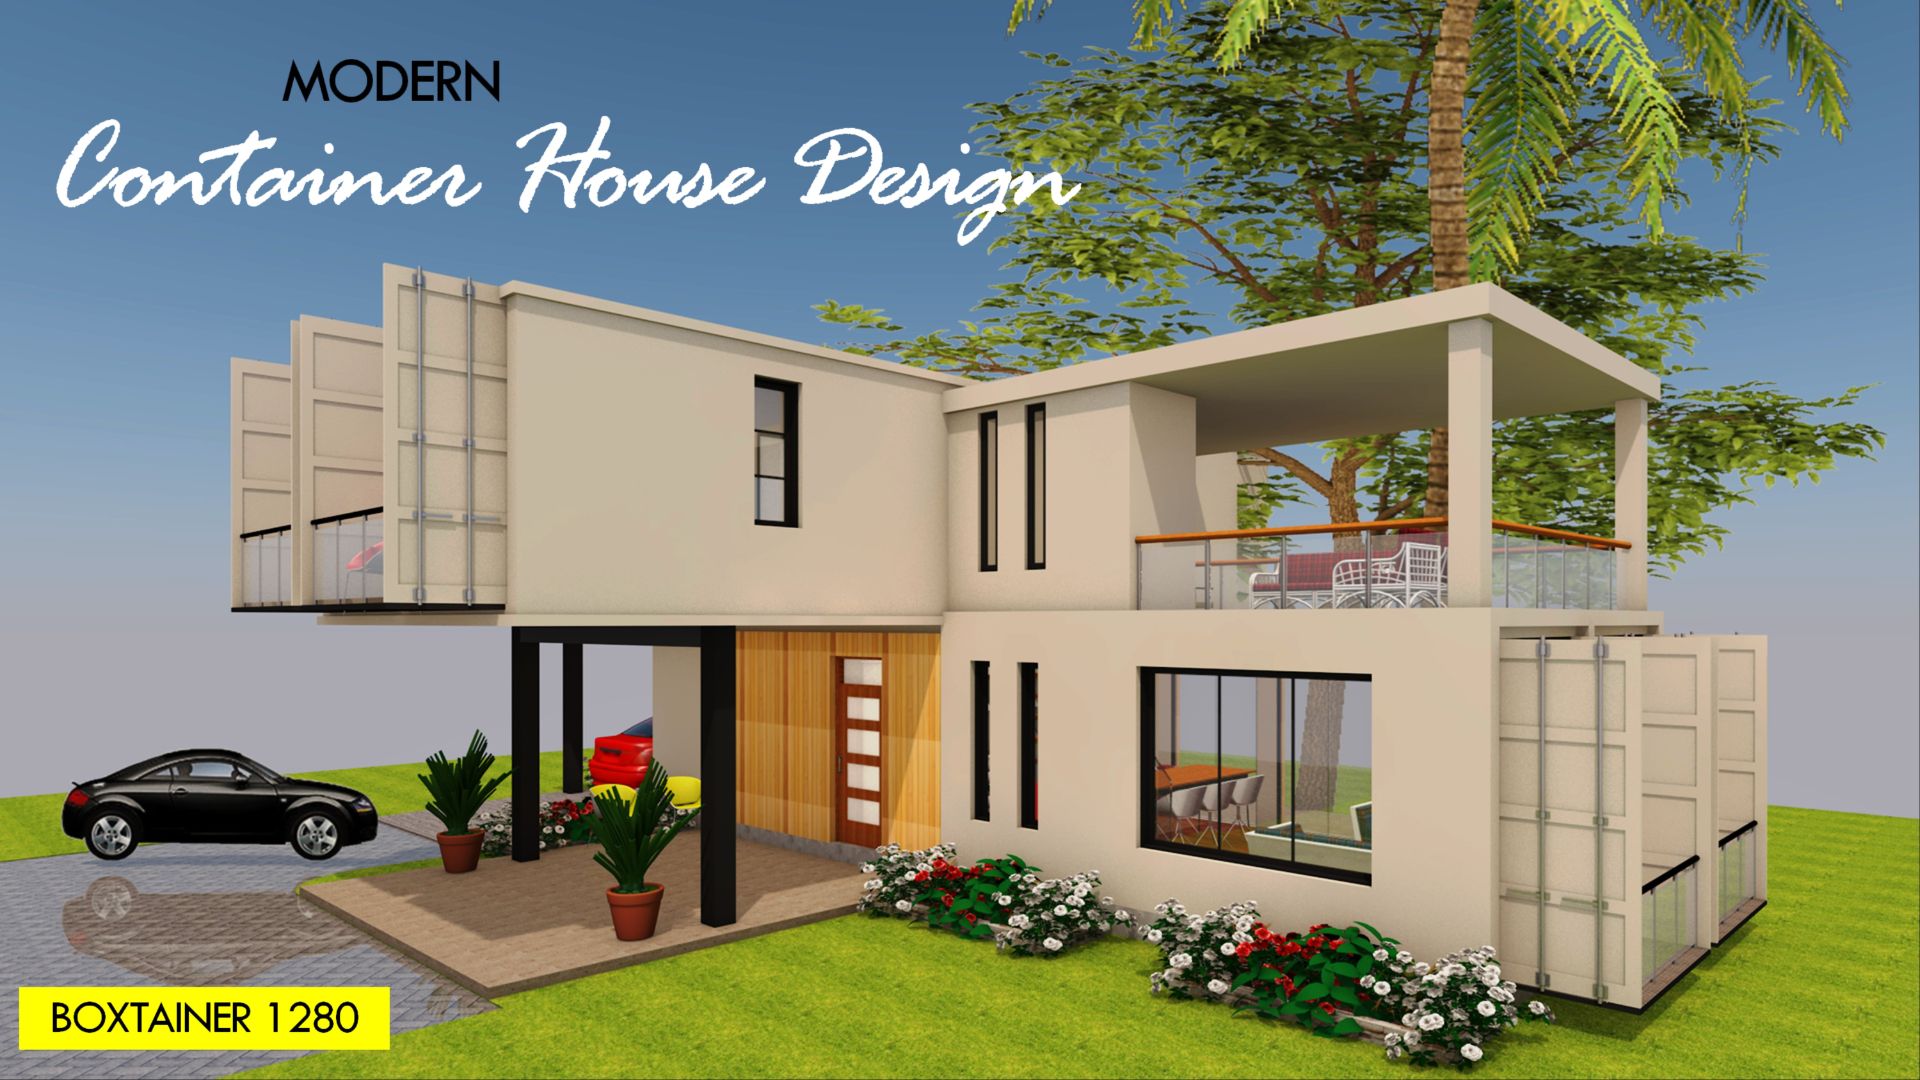 Modern Container House Design +Floor Plan- BOXTAINER 1280X